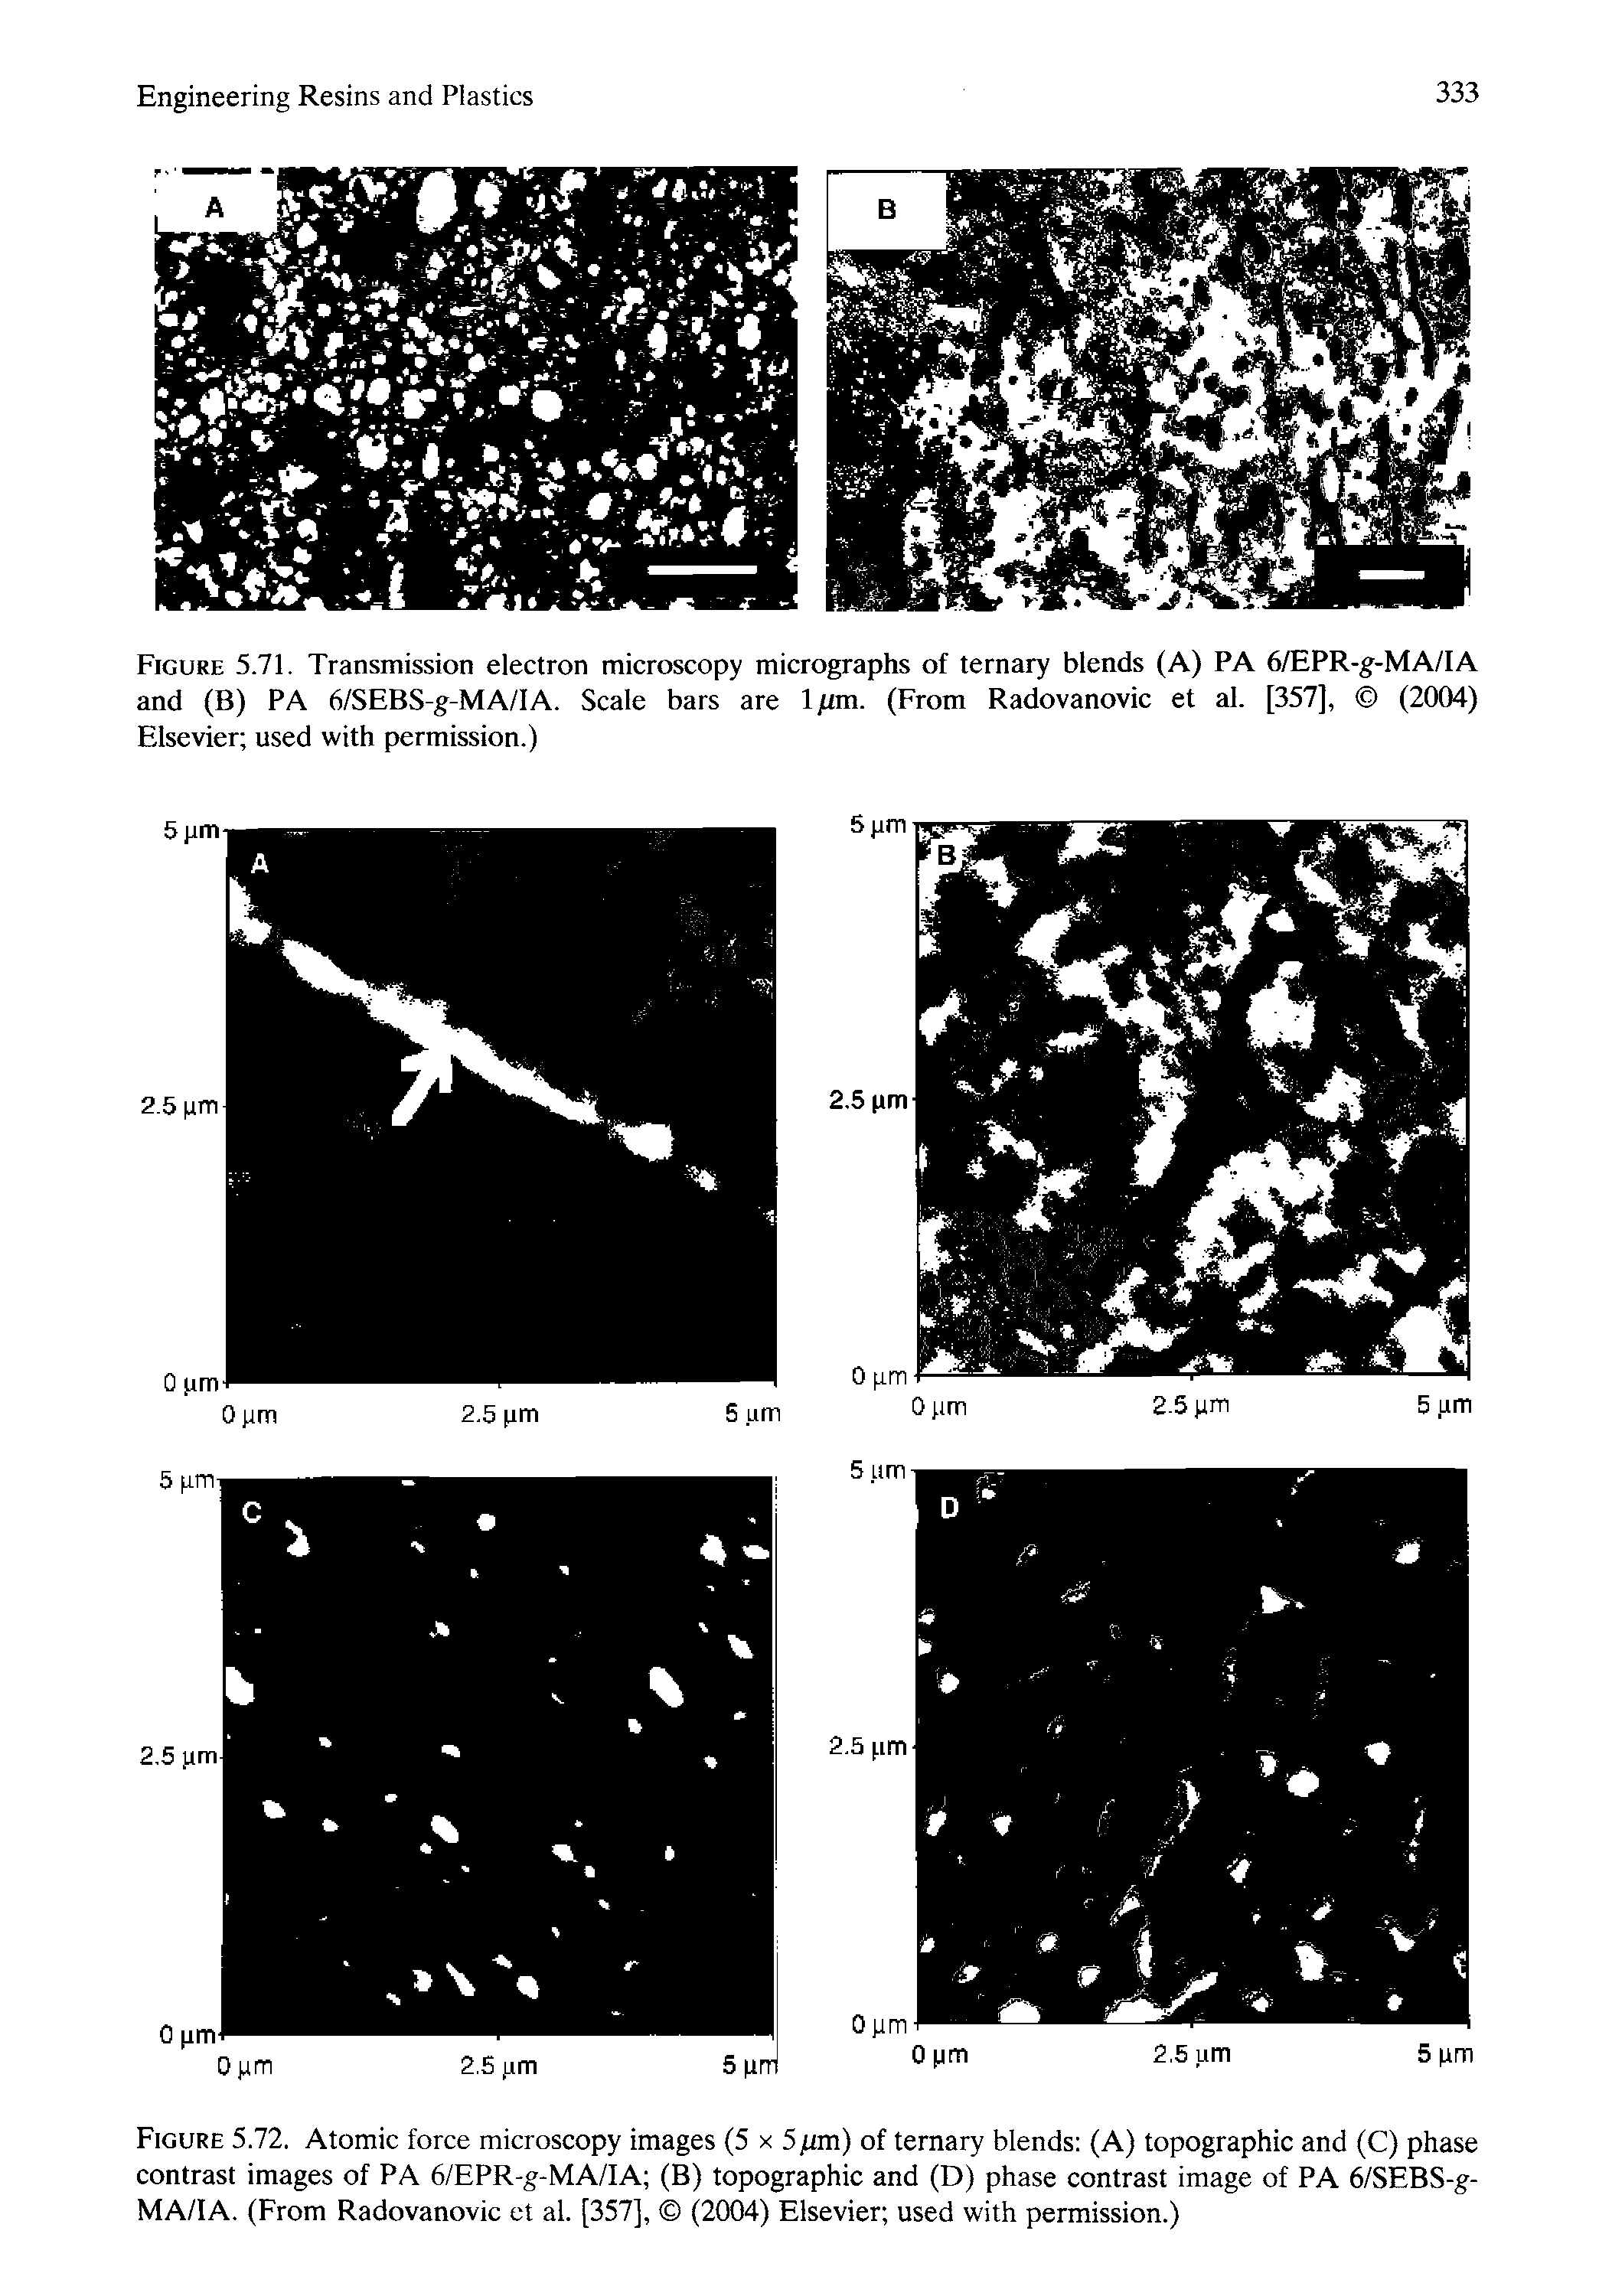 Figure 5.72. Atomic force microscopy images (5 x 5fan) of ternary blends (A) topographic and (C) phase contrast images of PA 6/EPR-g-MA/IA (B) topographic and (D) phase contrast image of PA 6/SEBS-g-MA/IA. (From Radovanovic et al. [357], (2004) Elsevier used with permission.)...